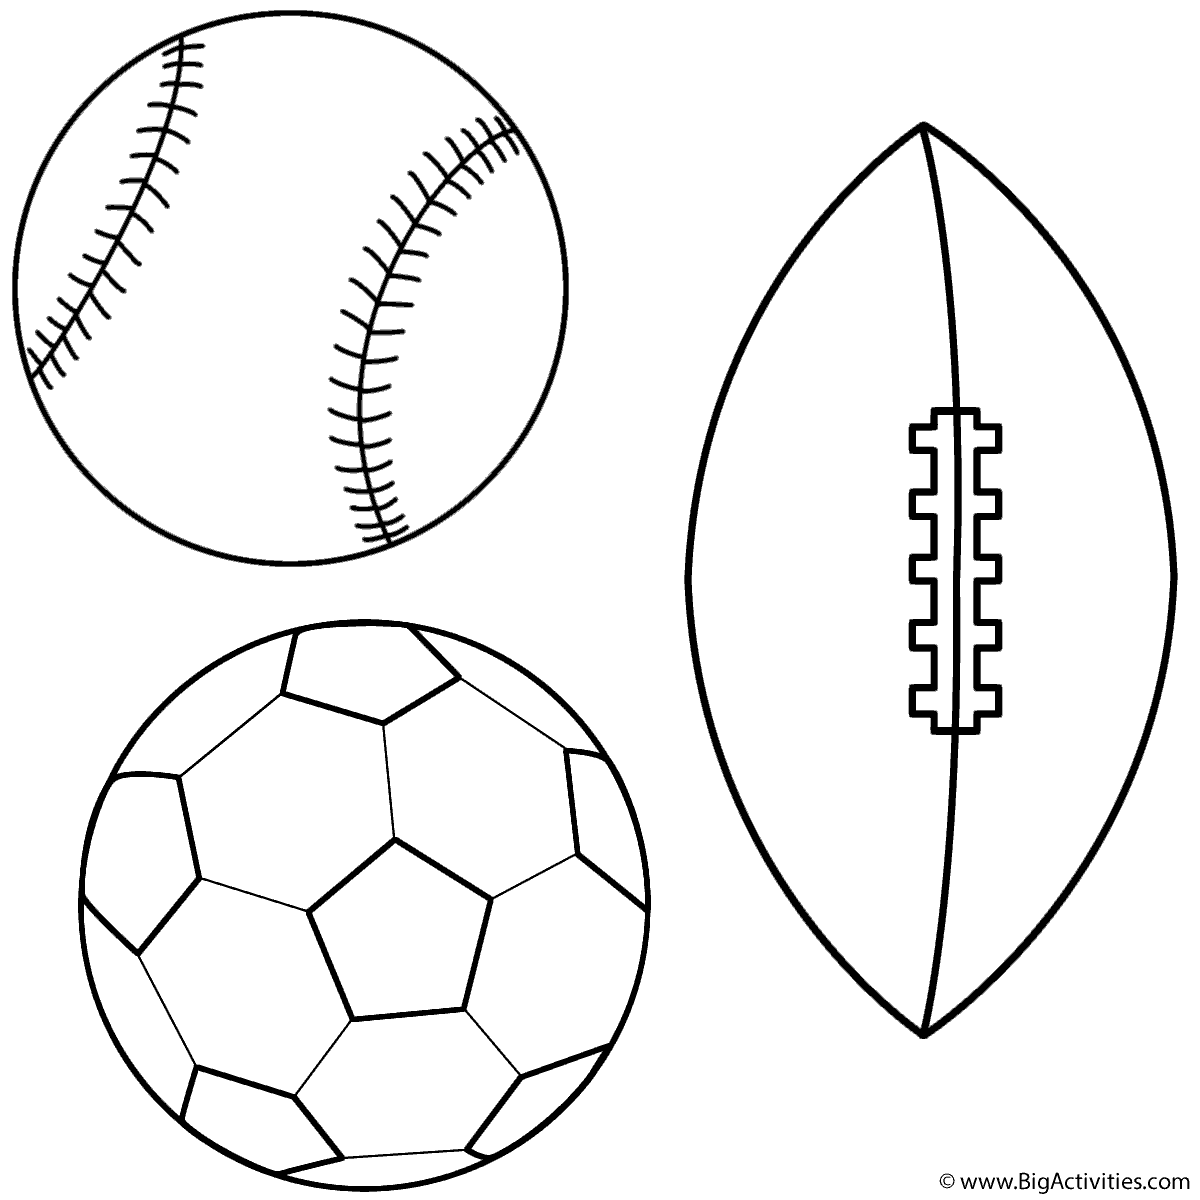 Coloring Pages  Best Baseball coloring pages